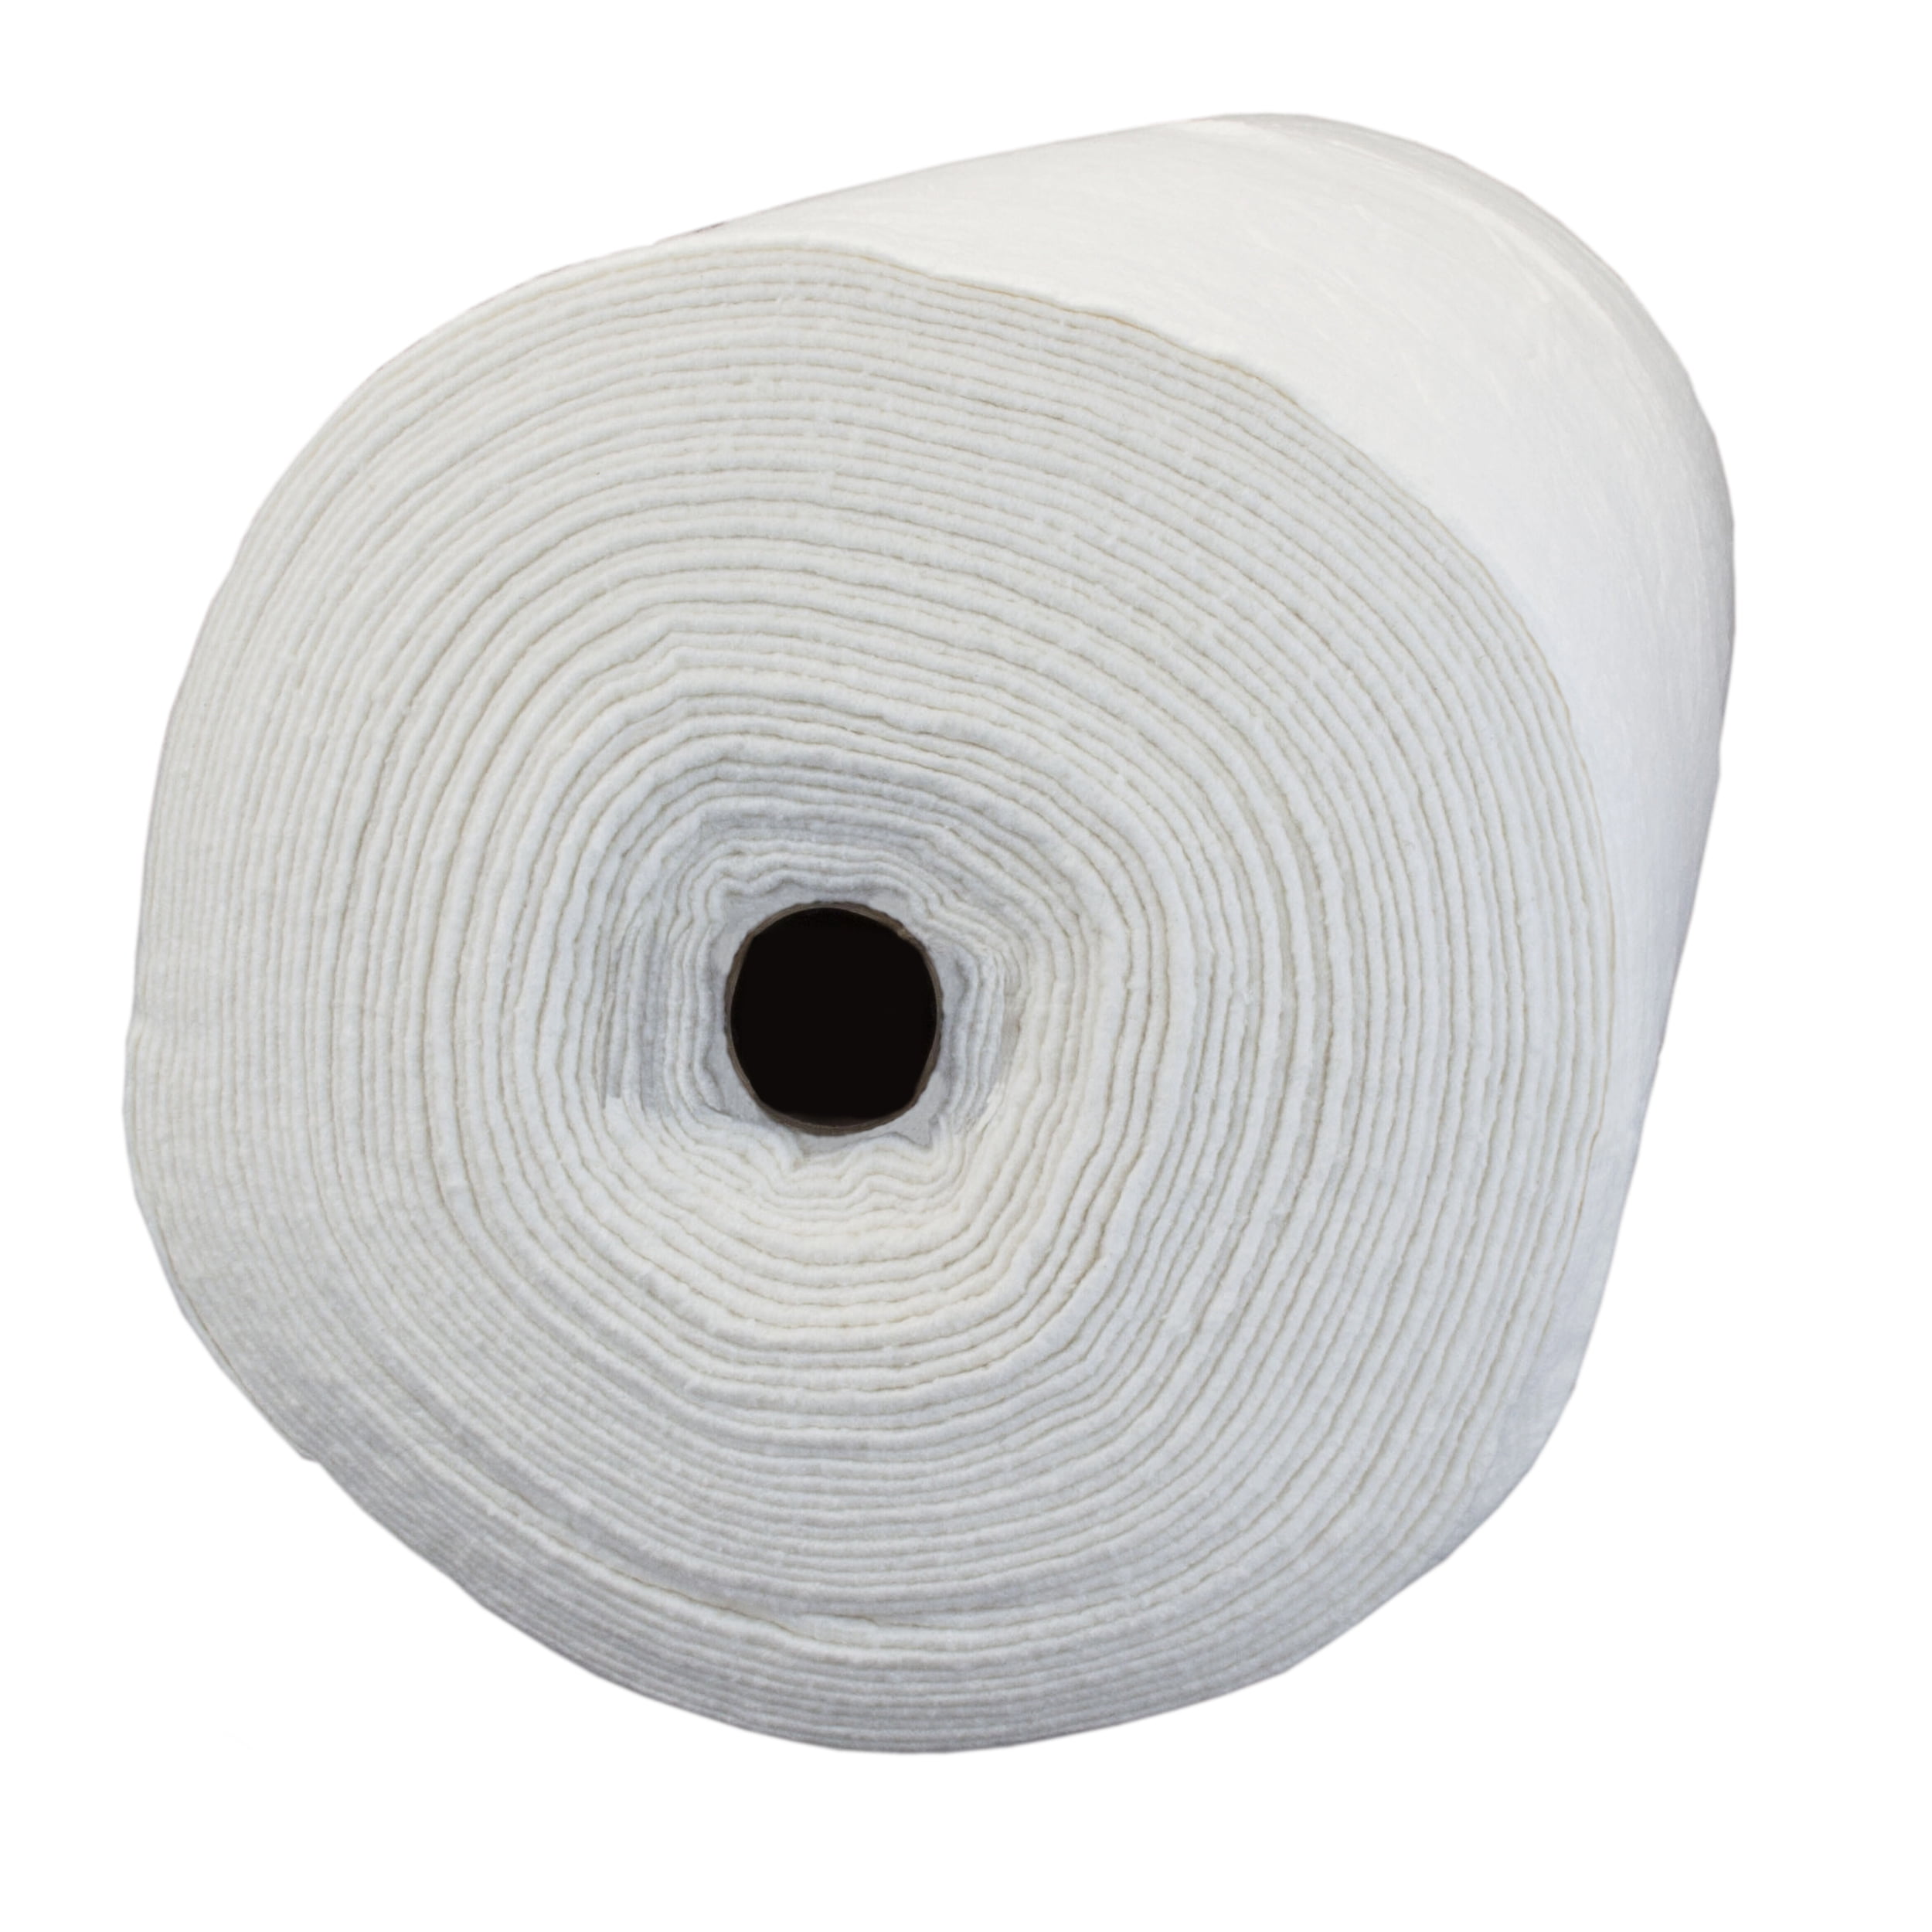 Pellon Natural Cotton Quilting Batting, off-White 90 x 30 Yards by the Bolt